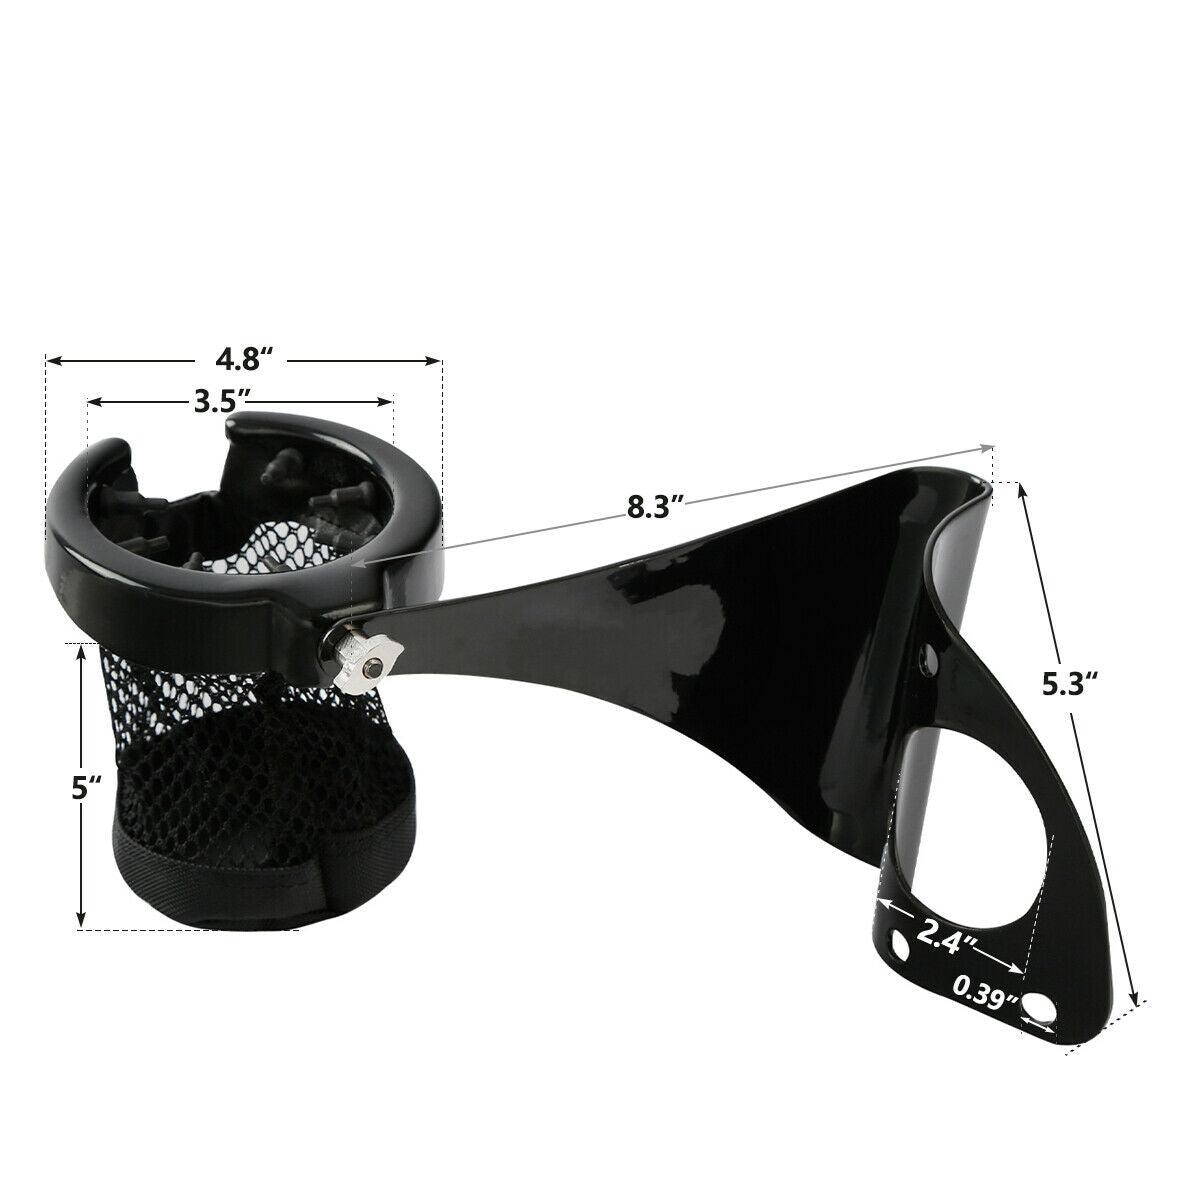 Rear Drink Cup Holder Passenger Fit For Harley Touring Street Road Glide 2014-Up - Moto Life Products